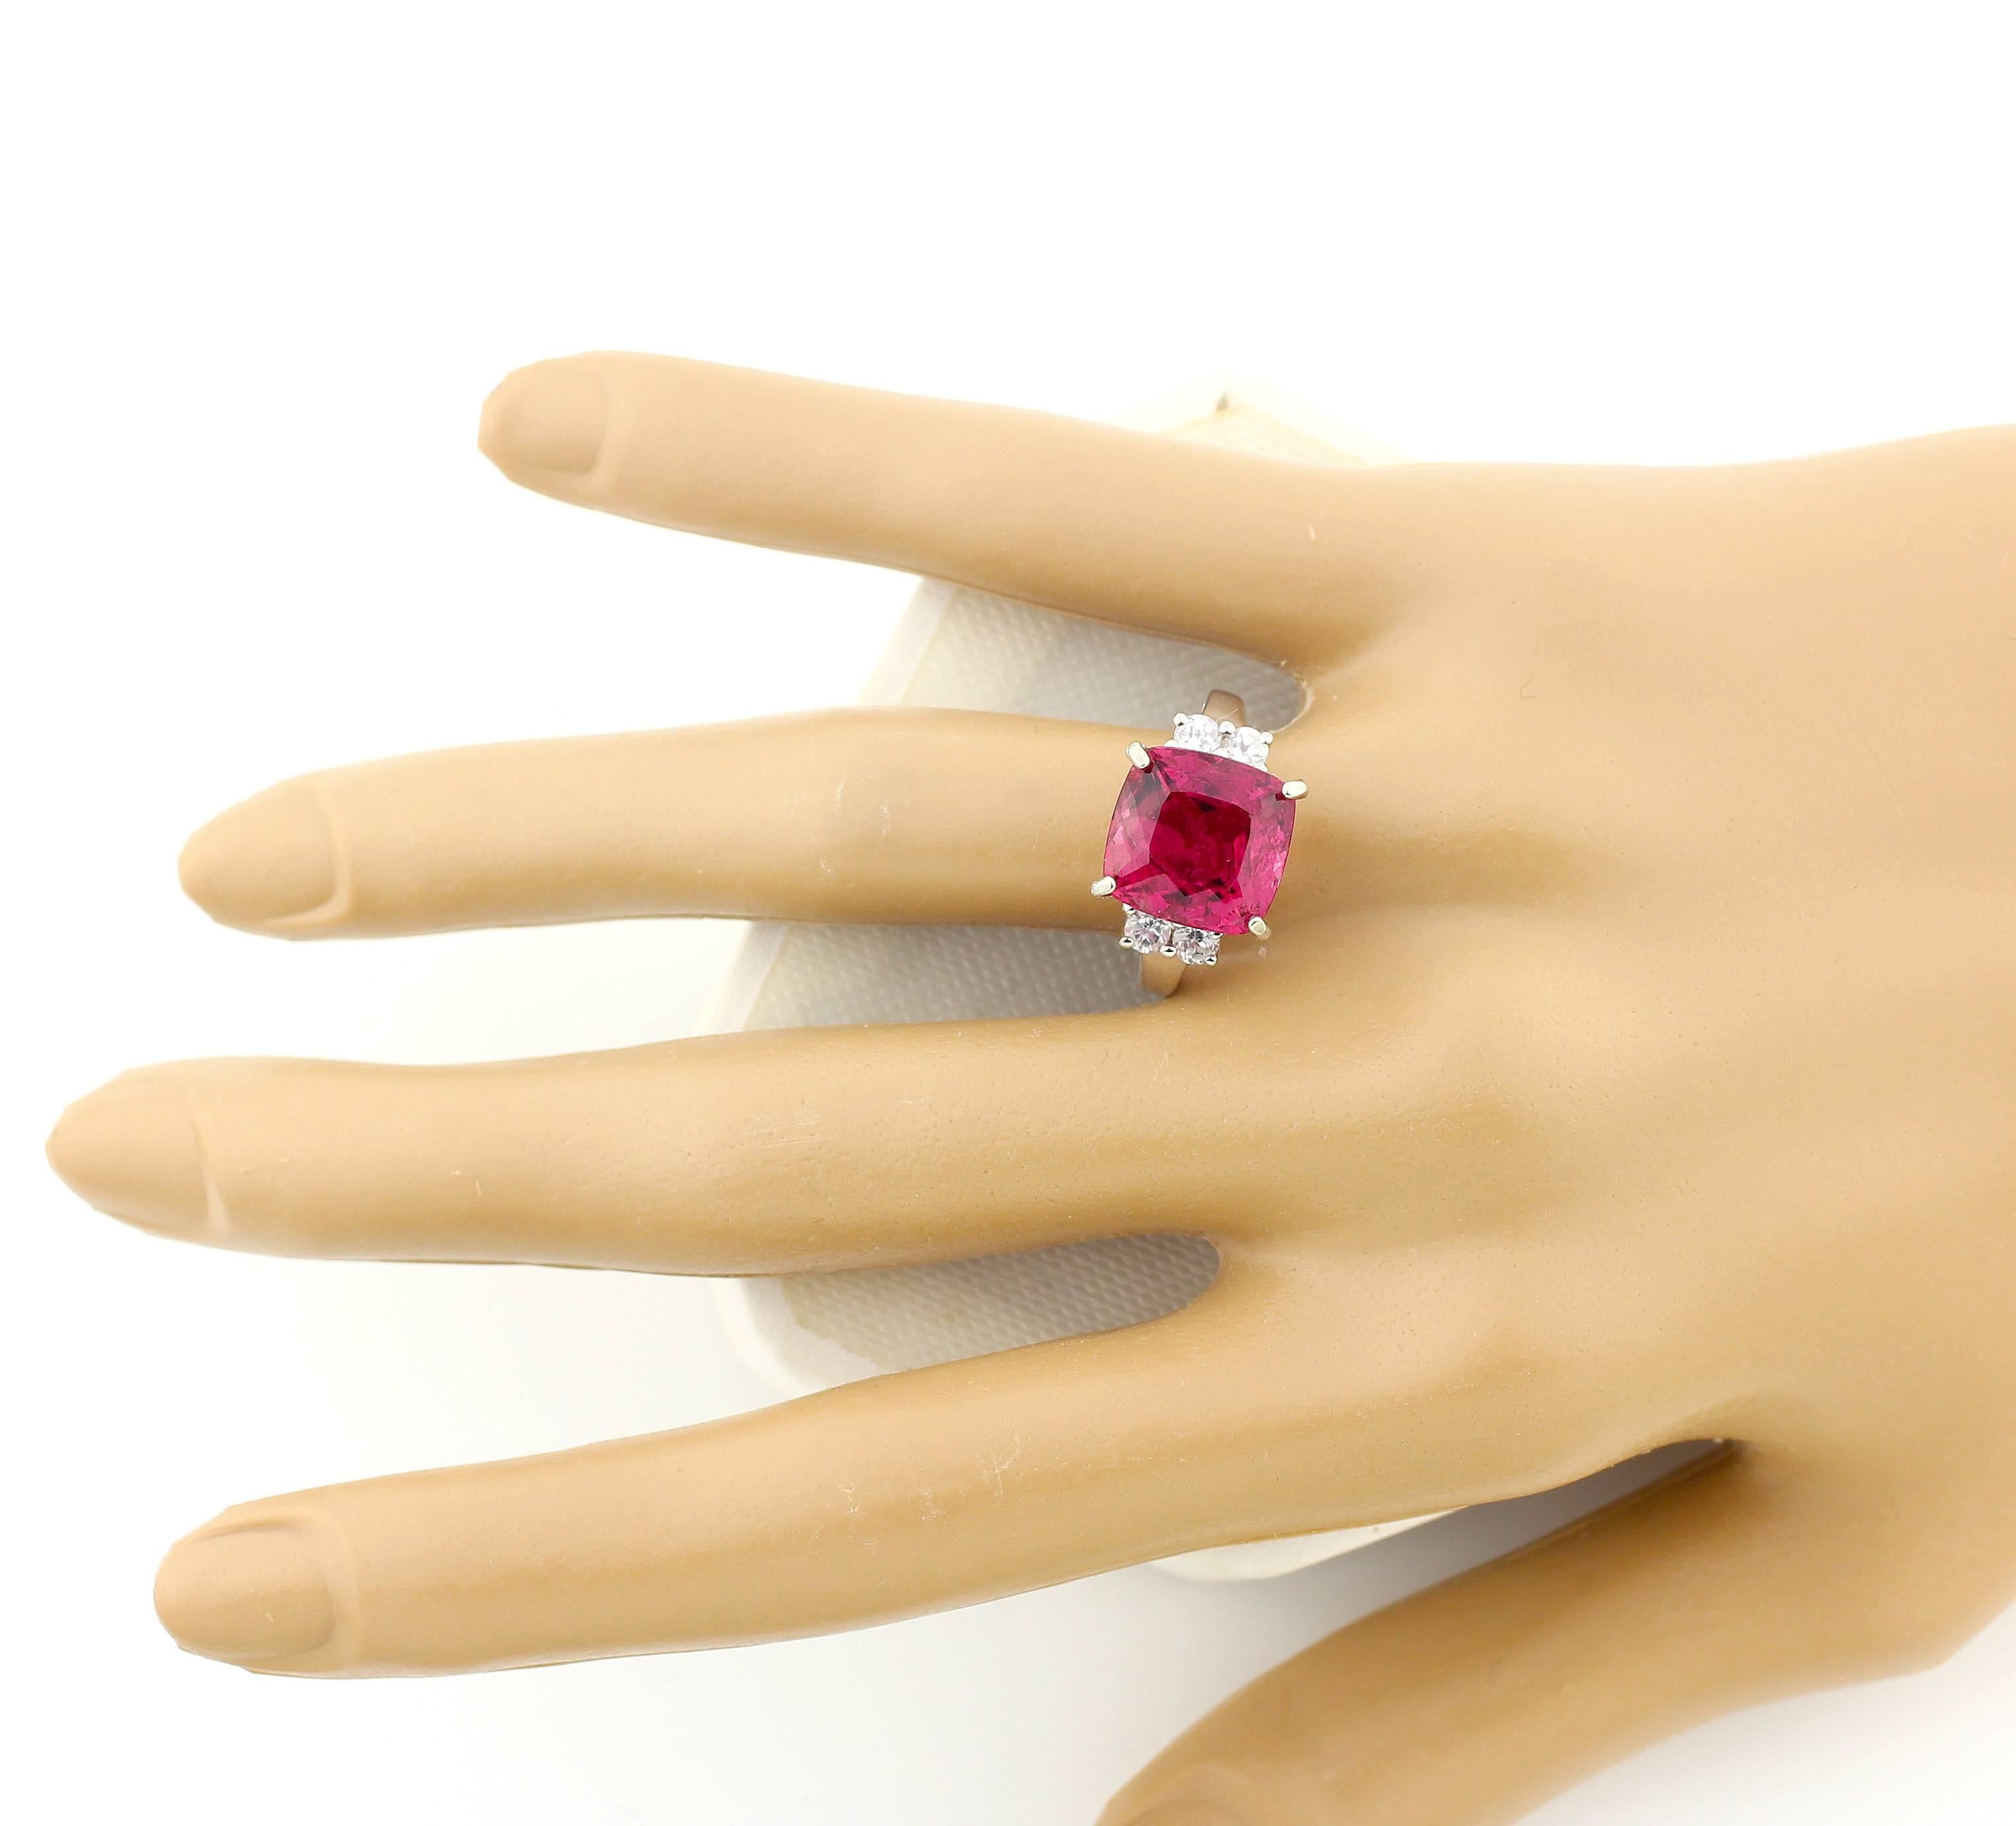 Sparkling brilliant 6.8 carat natural Brasilian Rubelite enhanced with sparkling white natural glittering Brazilian Topaz set in this unique handmade Sterling Silver ring size 7.  (the ring is sizable for free).  This is absolutely beautiful on your